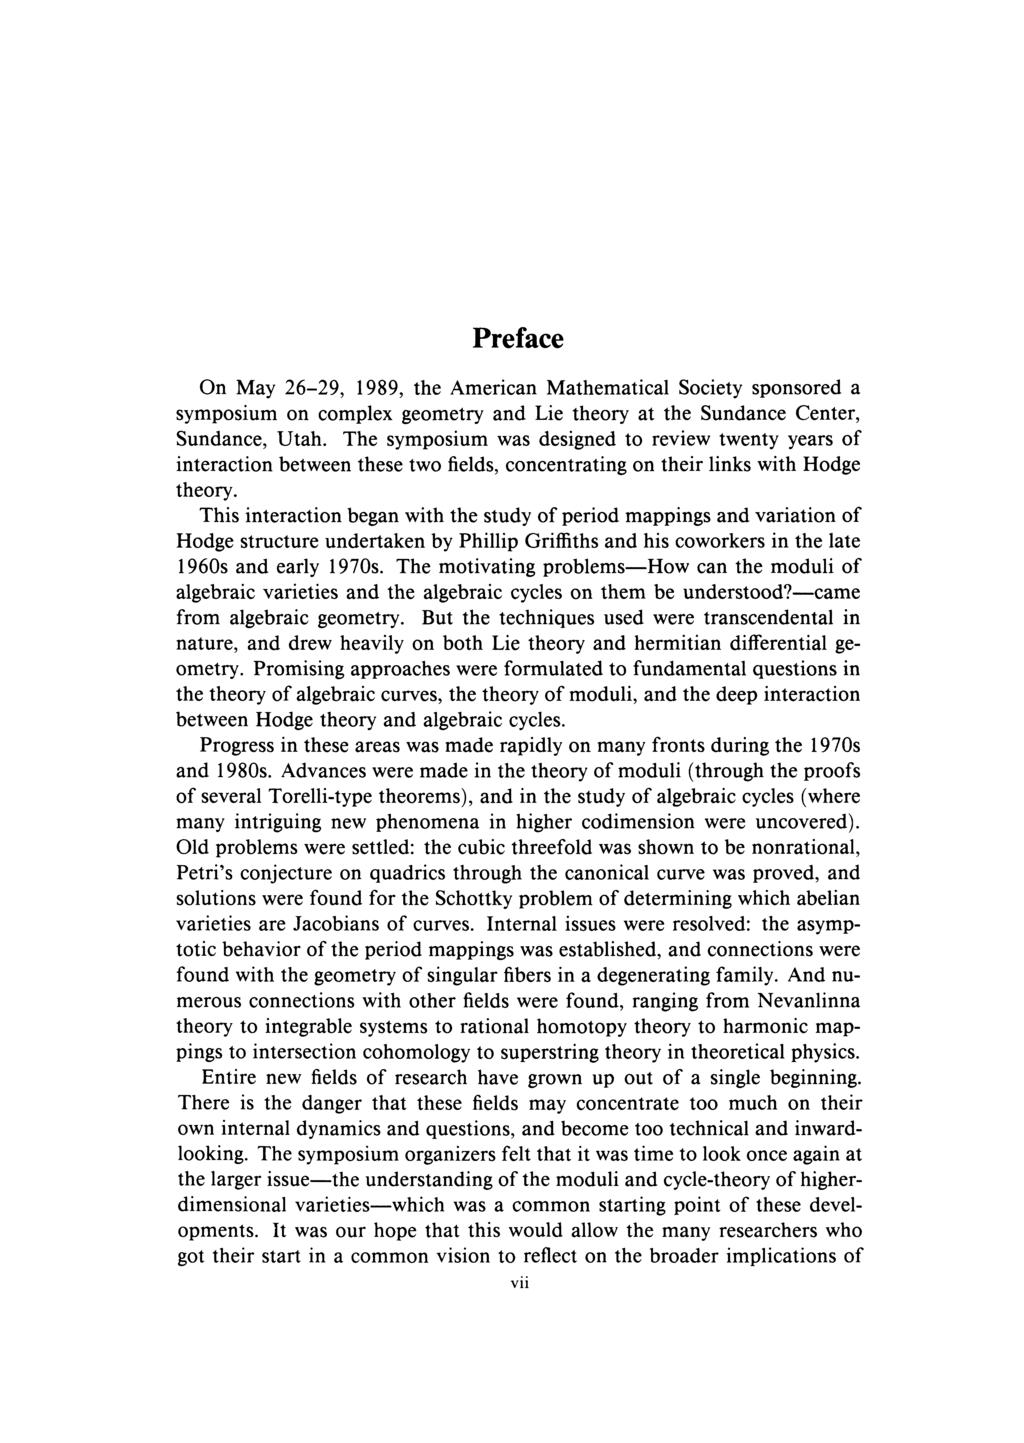 Preface On May 26-29, 1989, the American Mathematical Society sponsored a symposium on complex geometry and Lie theory at the Sundance Center, Sundance, Utah.